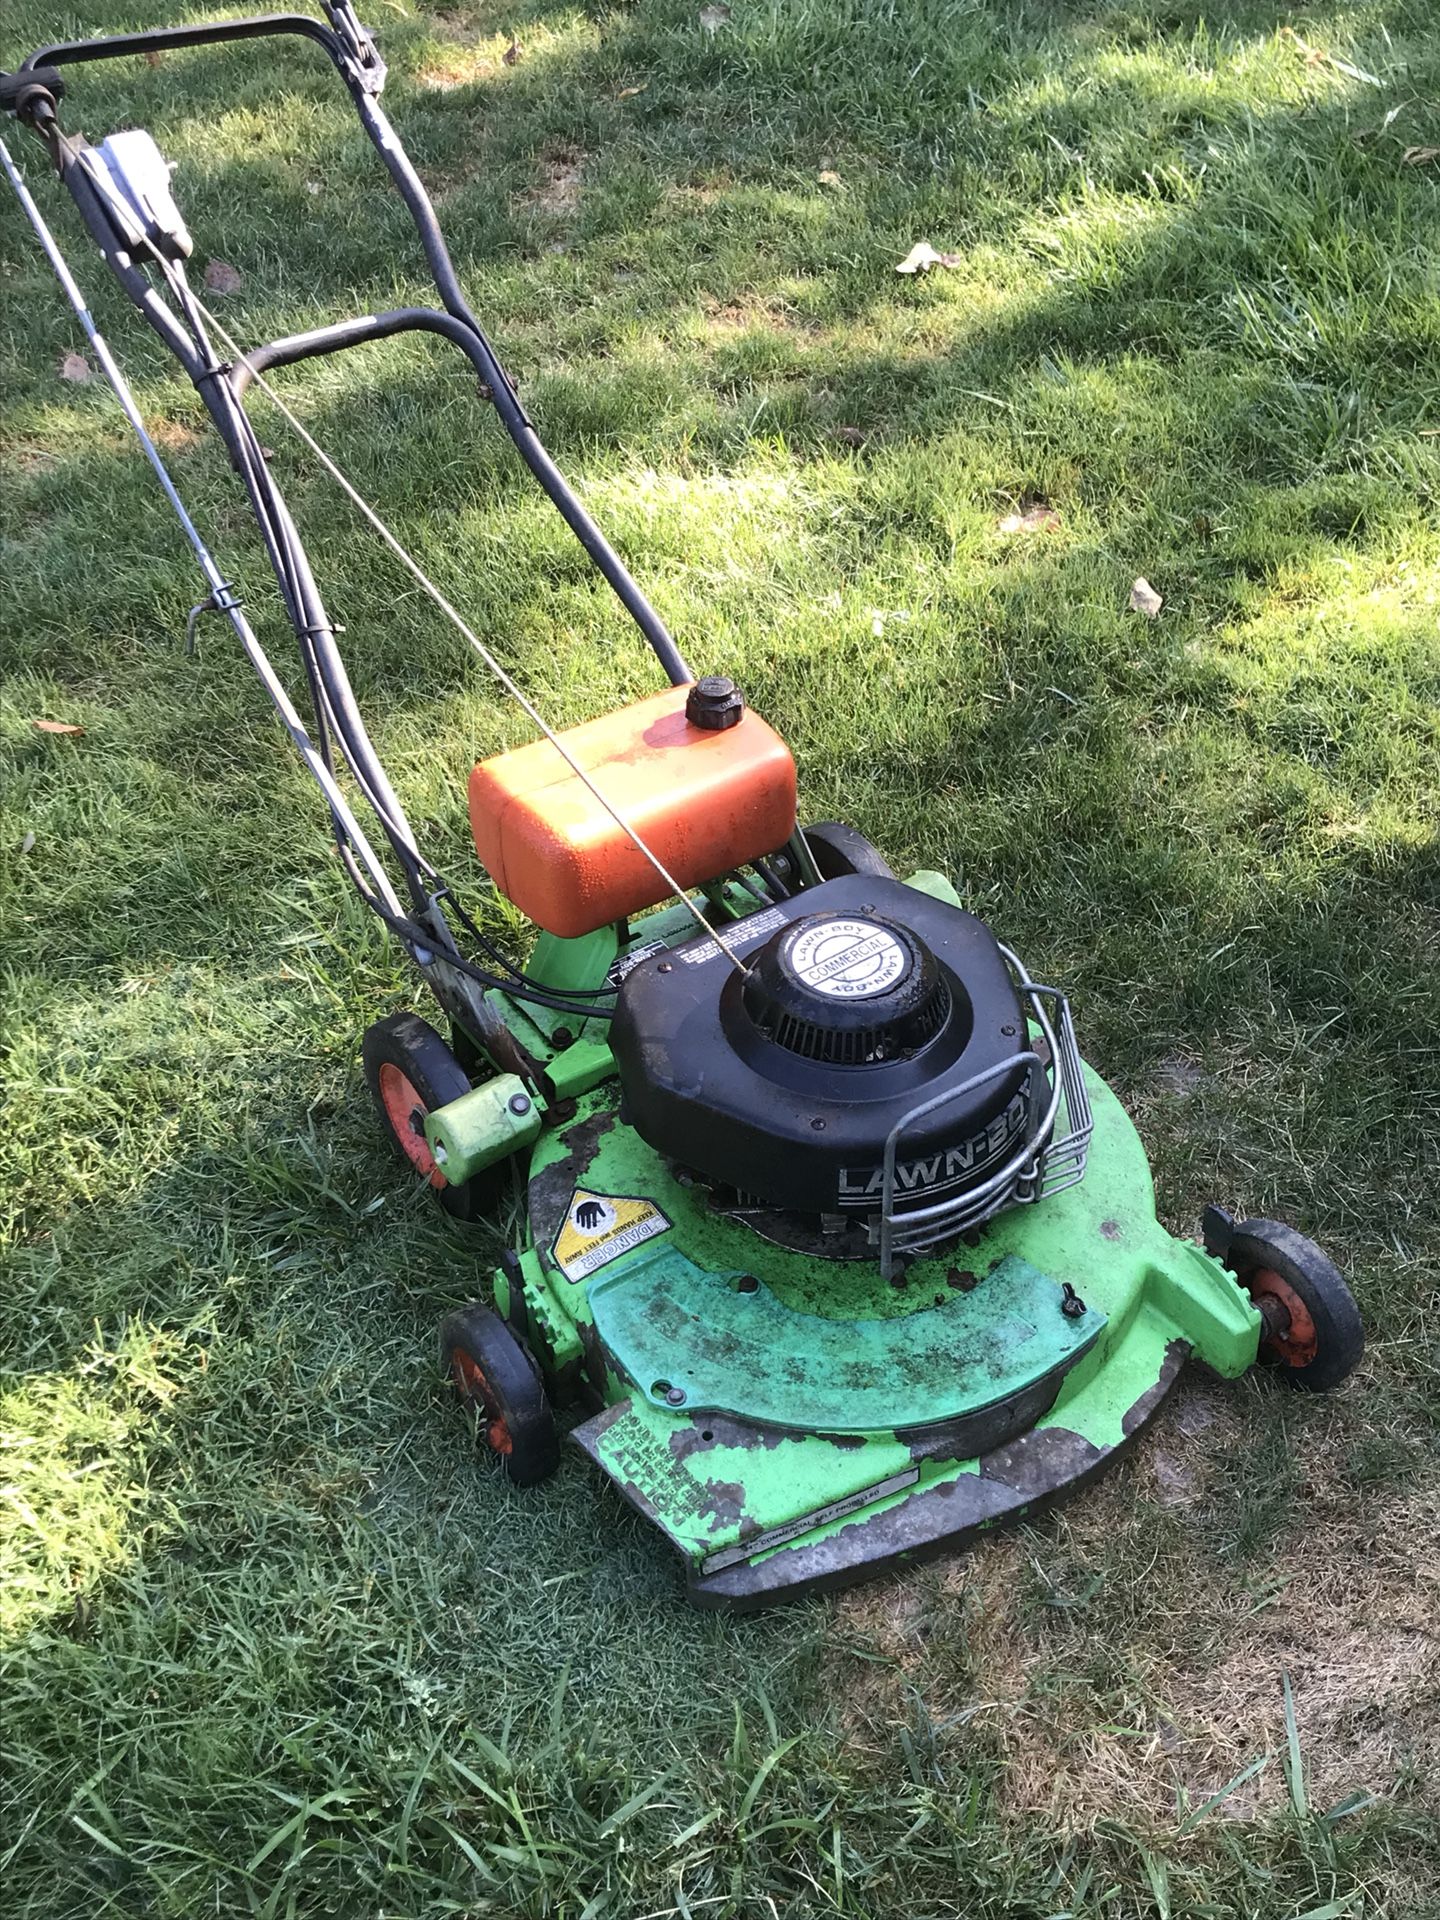 21” Lawn Boy commercial push mower (does not run)